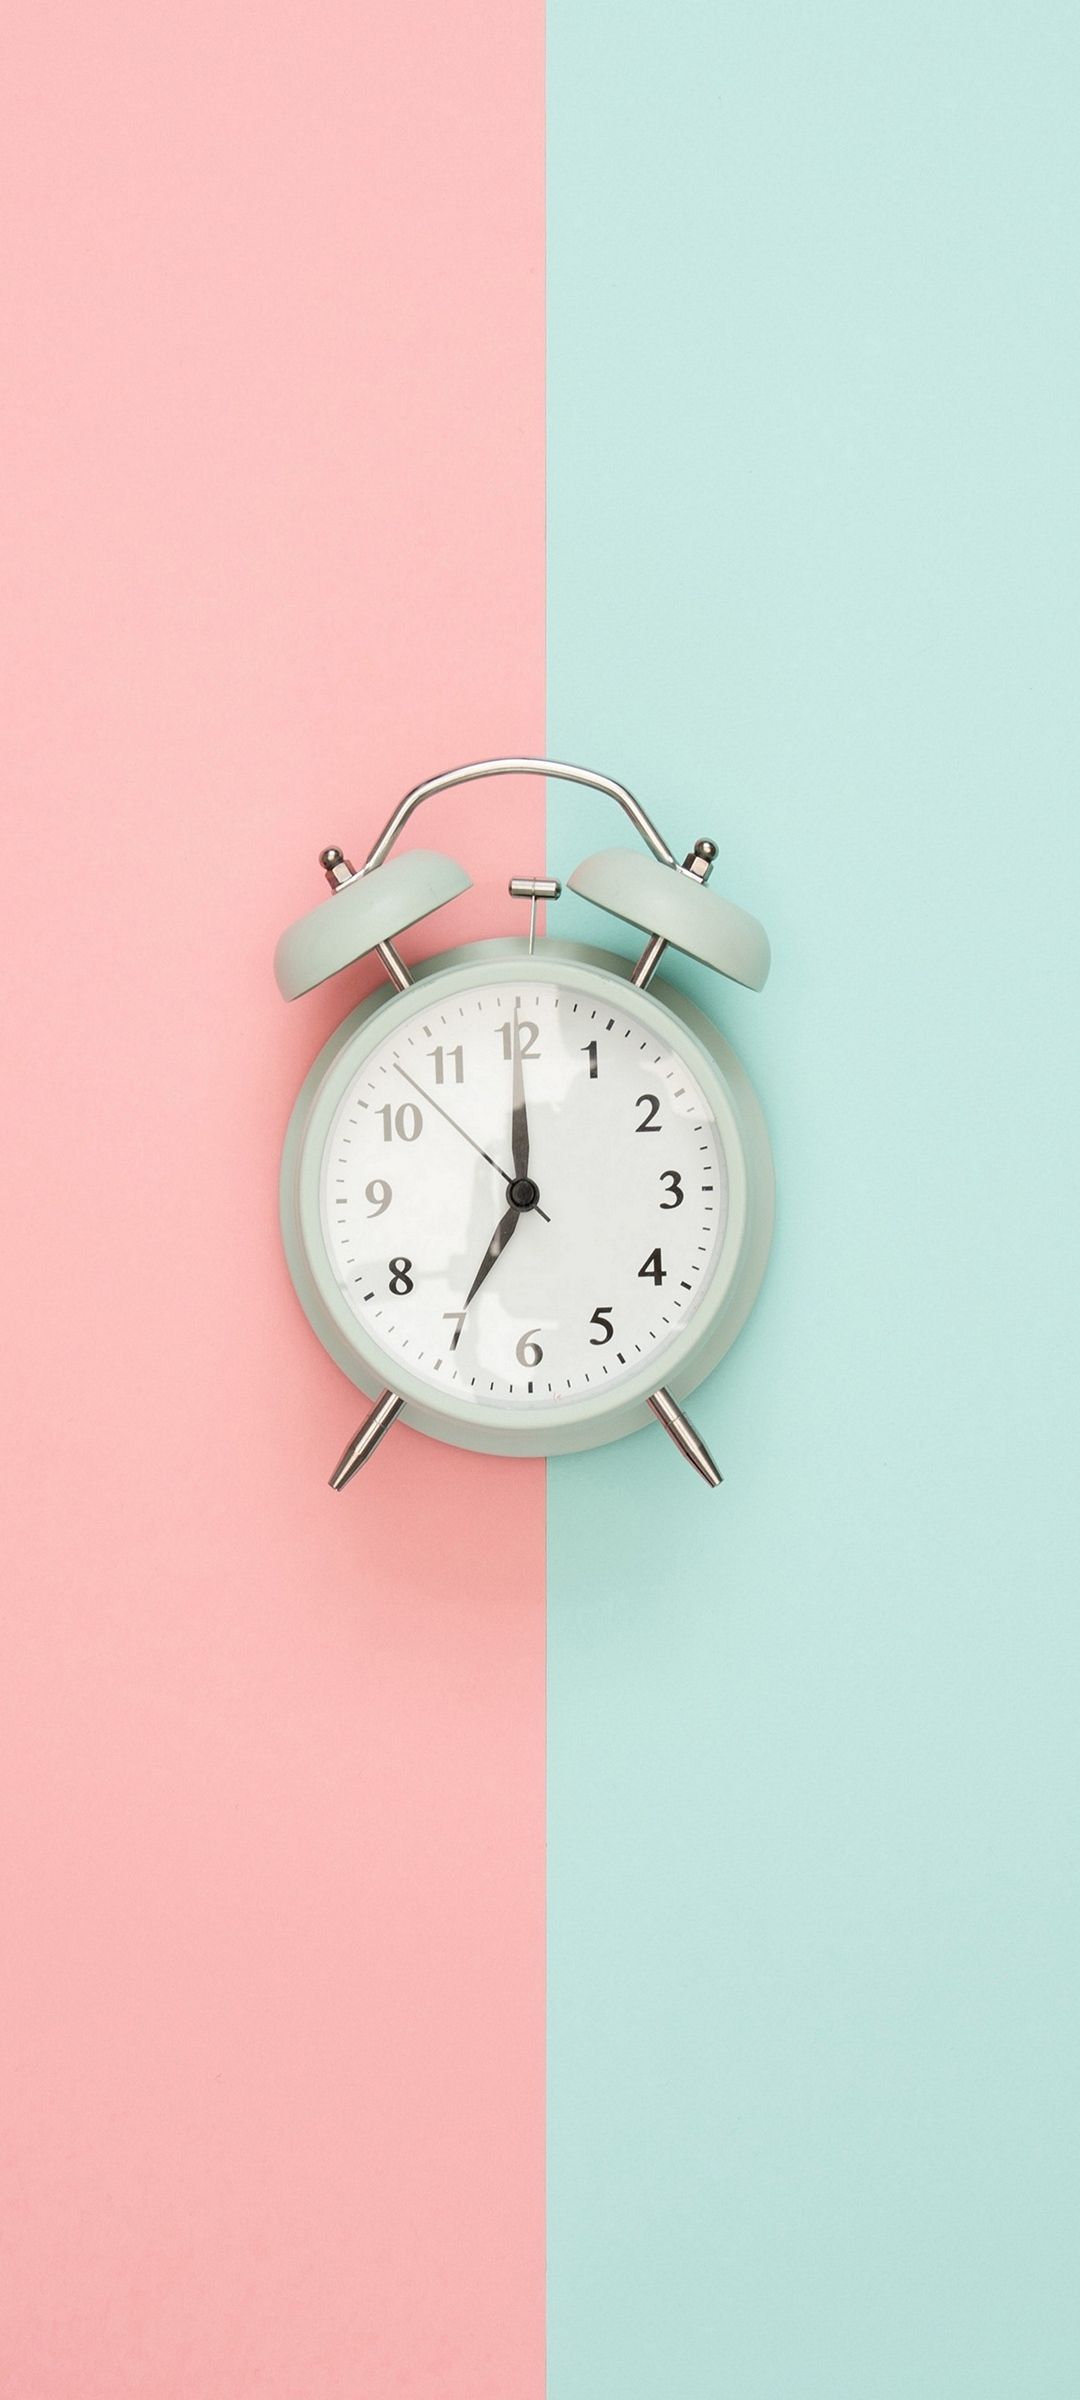 A clock on a pink and blue background - 1080x2400